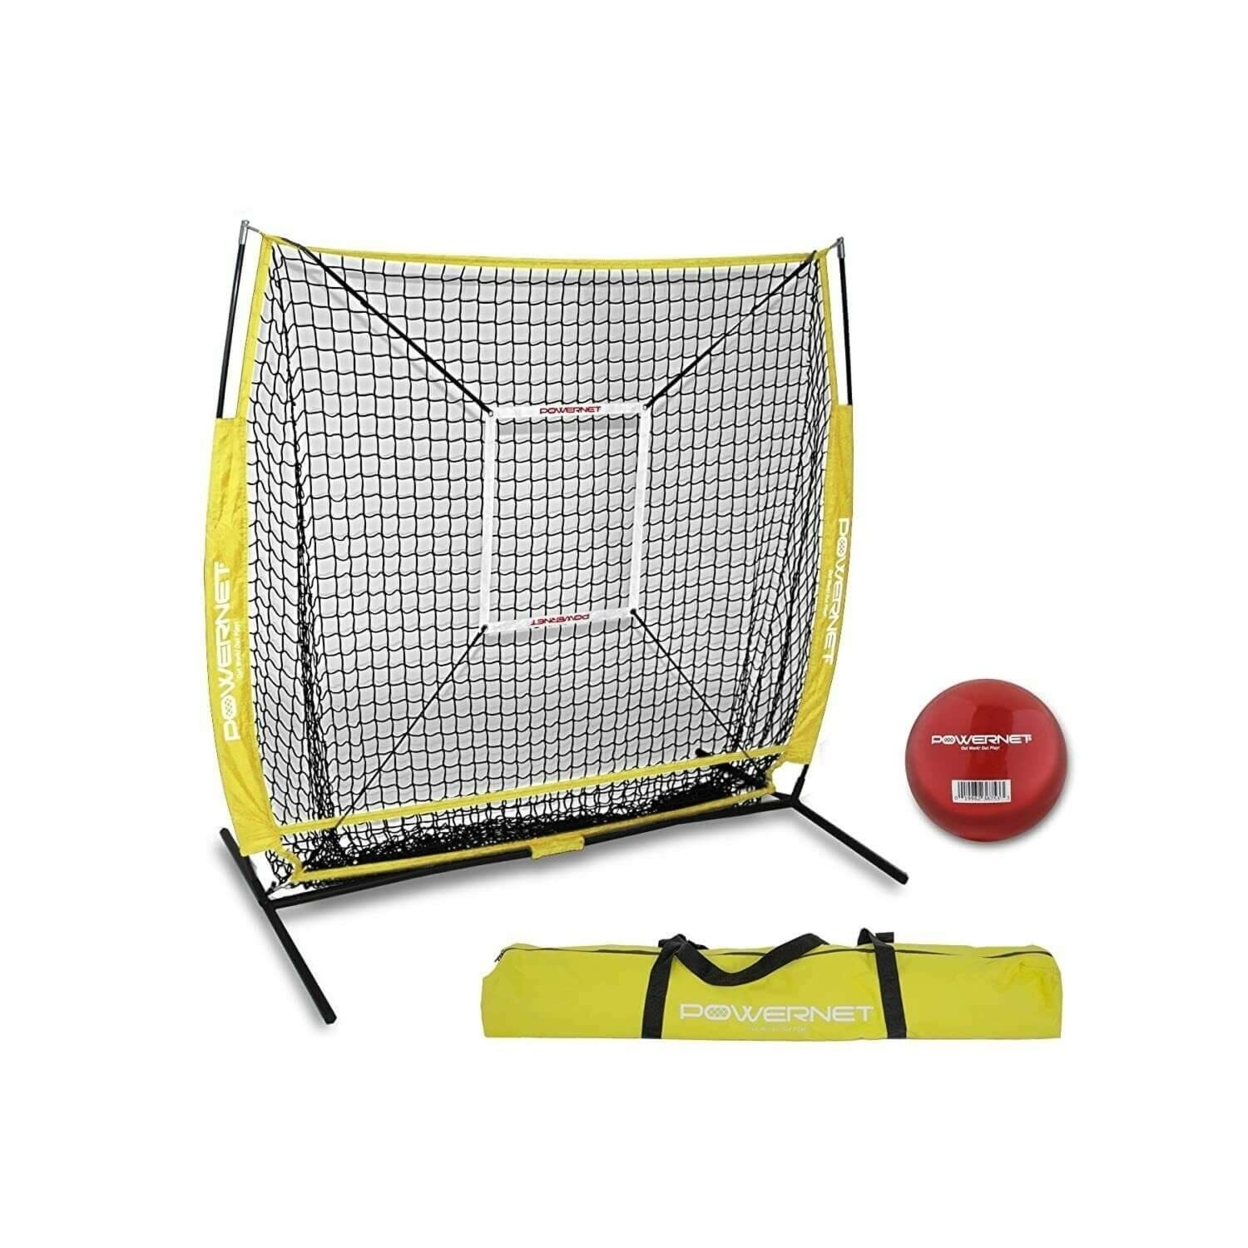 PowerNet 5x5 Practice Hitting Pitching Net + Strike Zone Attachment + Weighted Training Ball Bundle + Carry Bag - Black